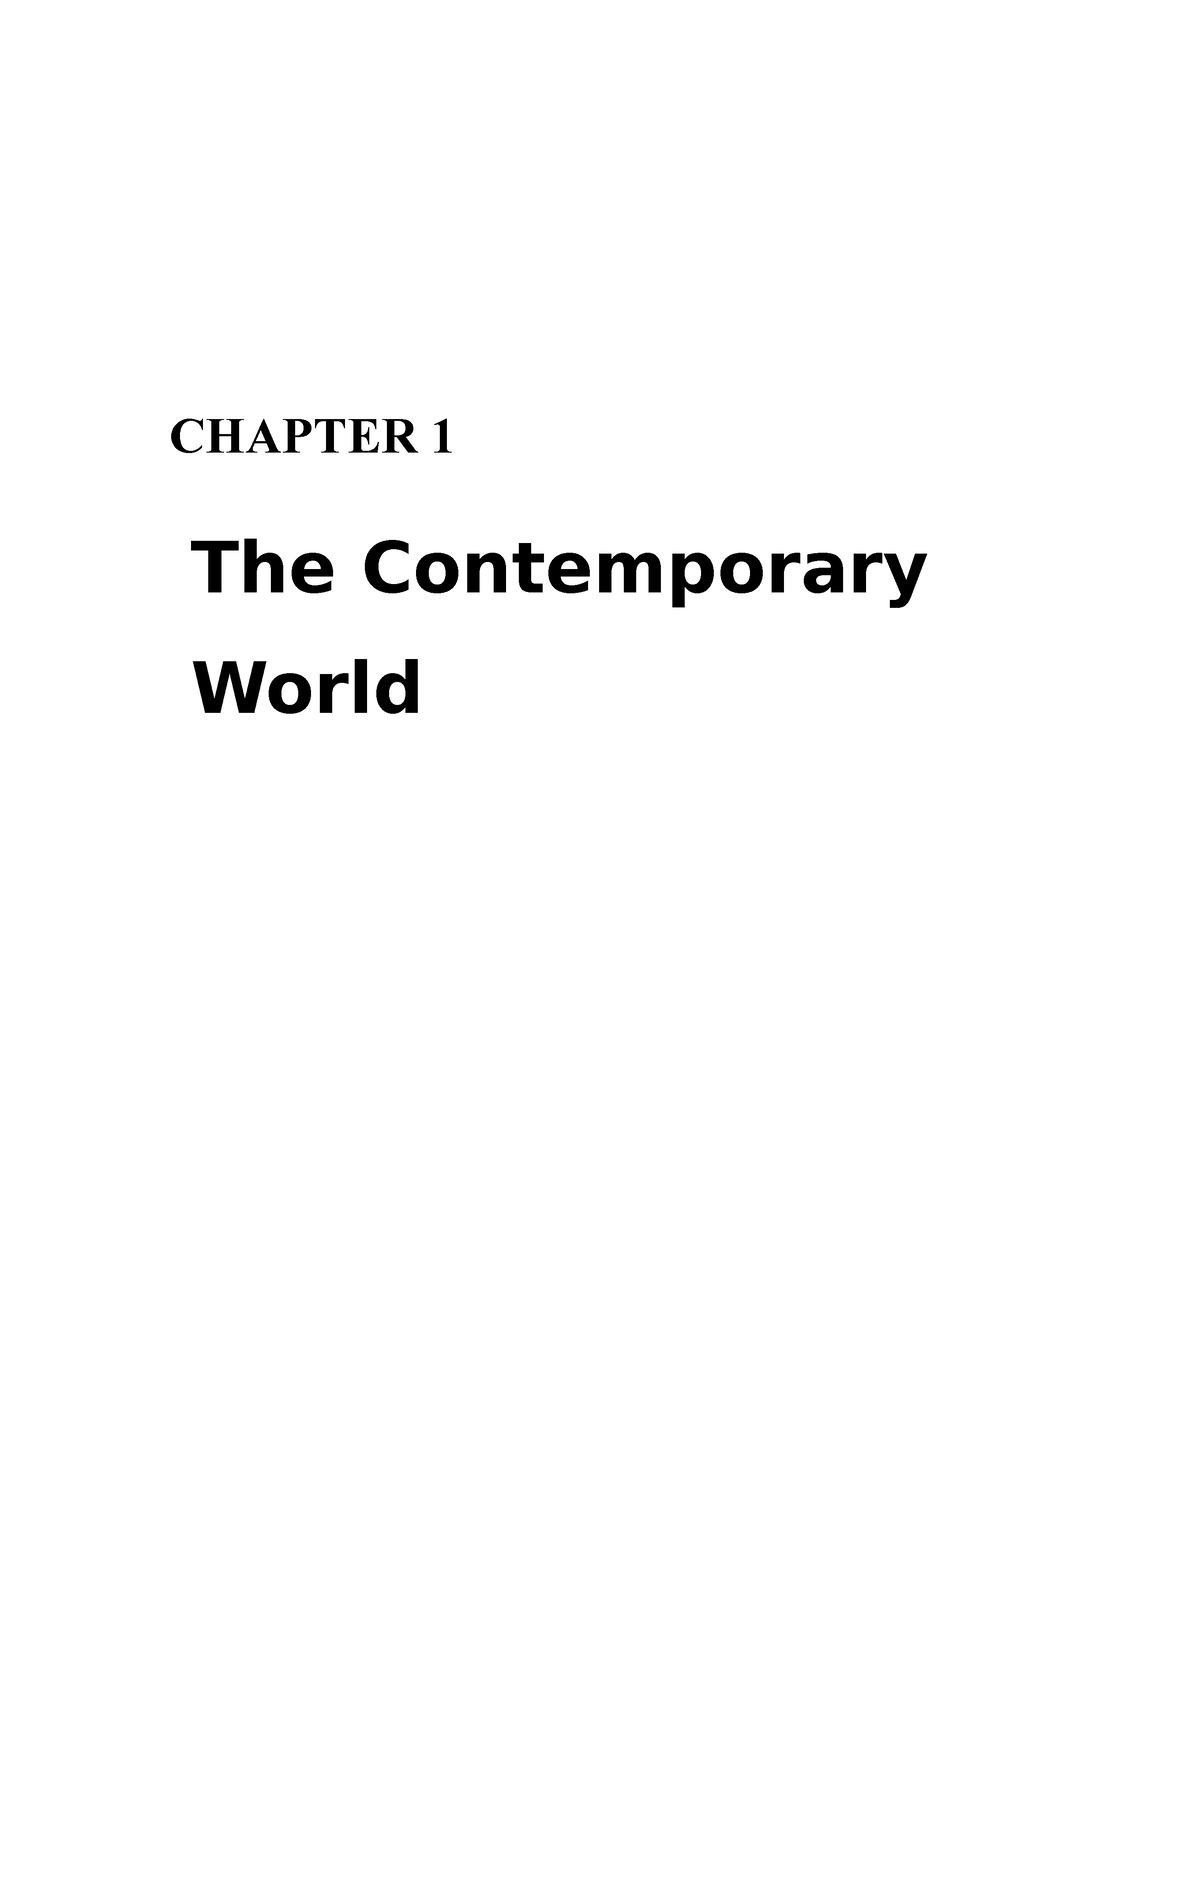 Chapter-1 - lectures for soc sci 113 - CHAPTER 1 The Contemporary World ...